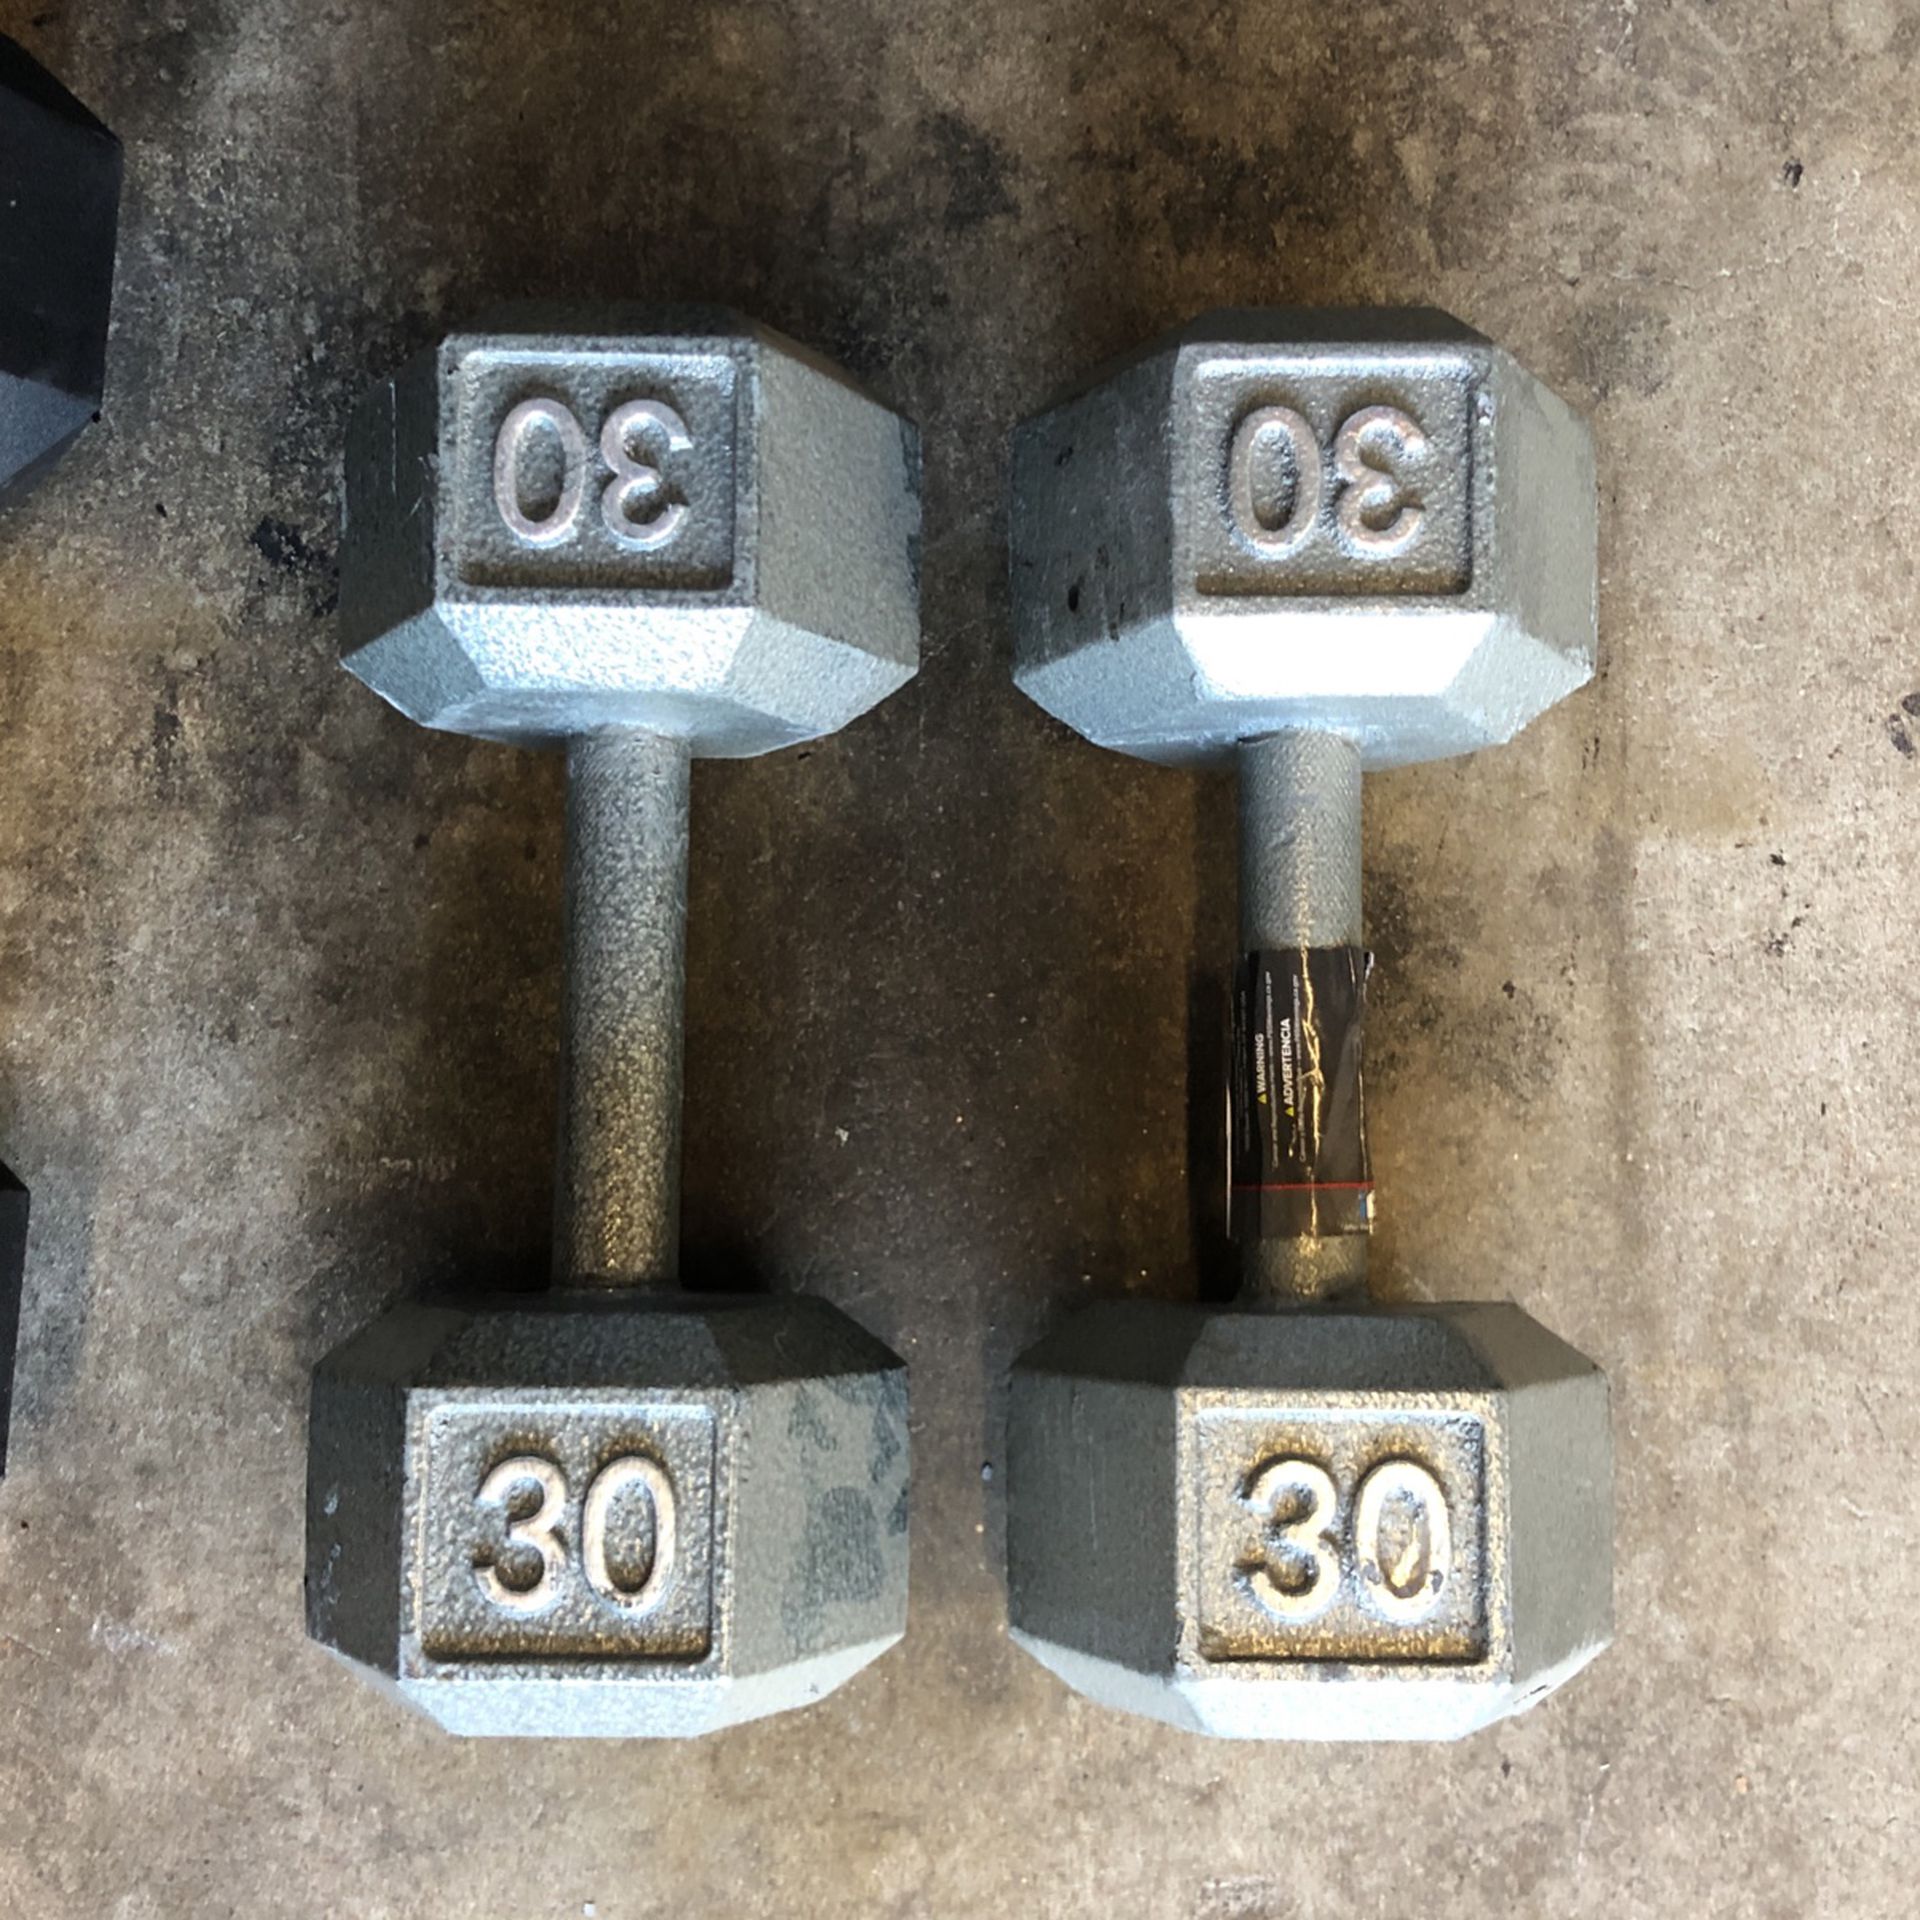 NEW Unlimited Supply Of Dumbbells